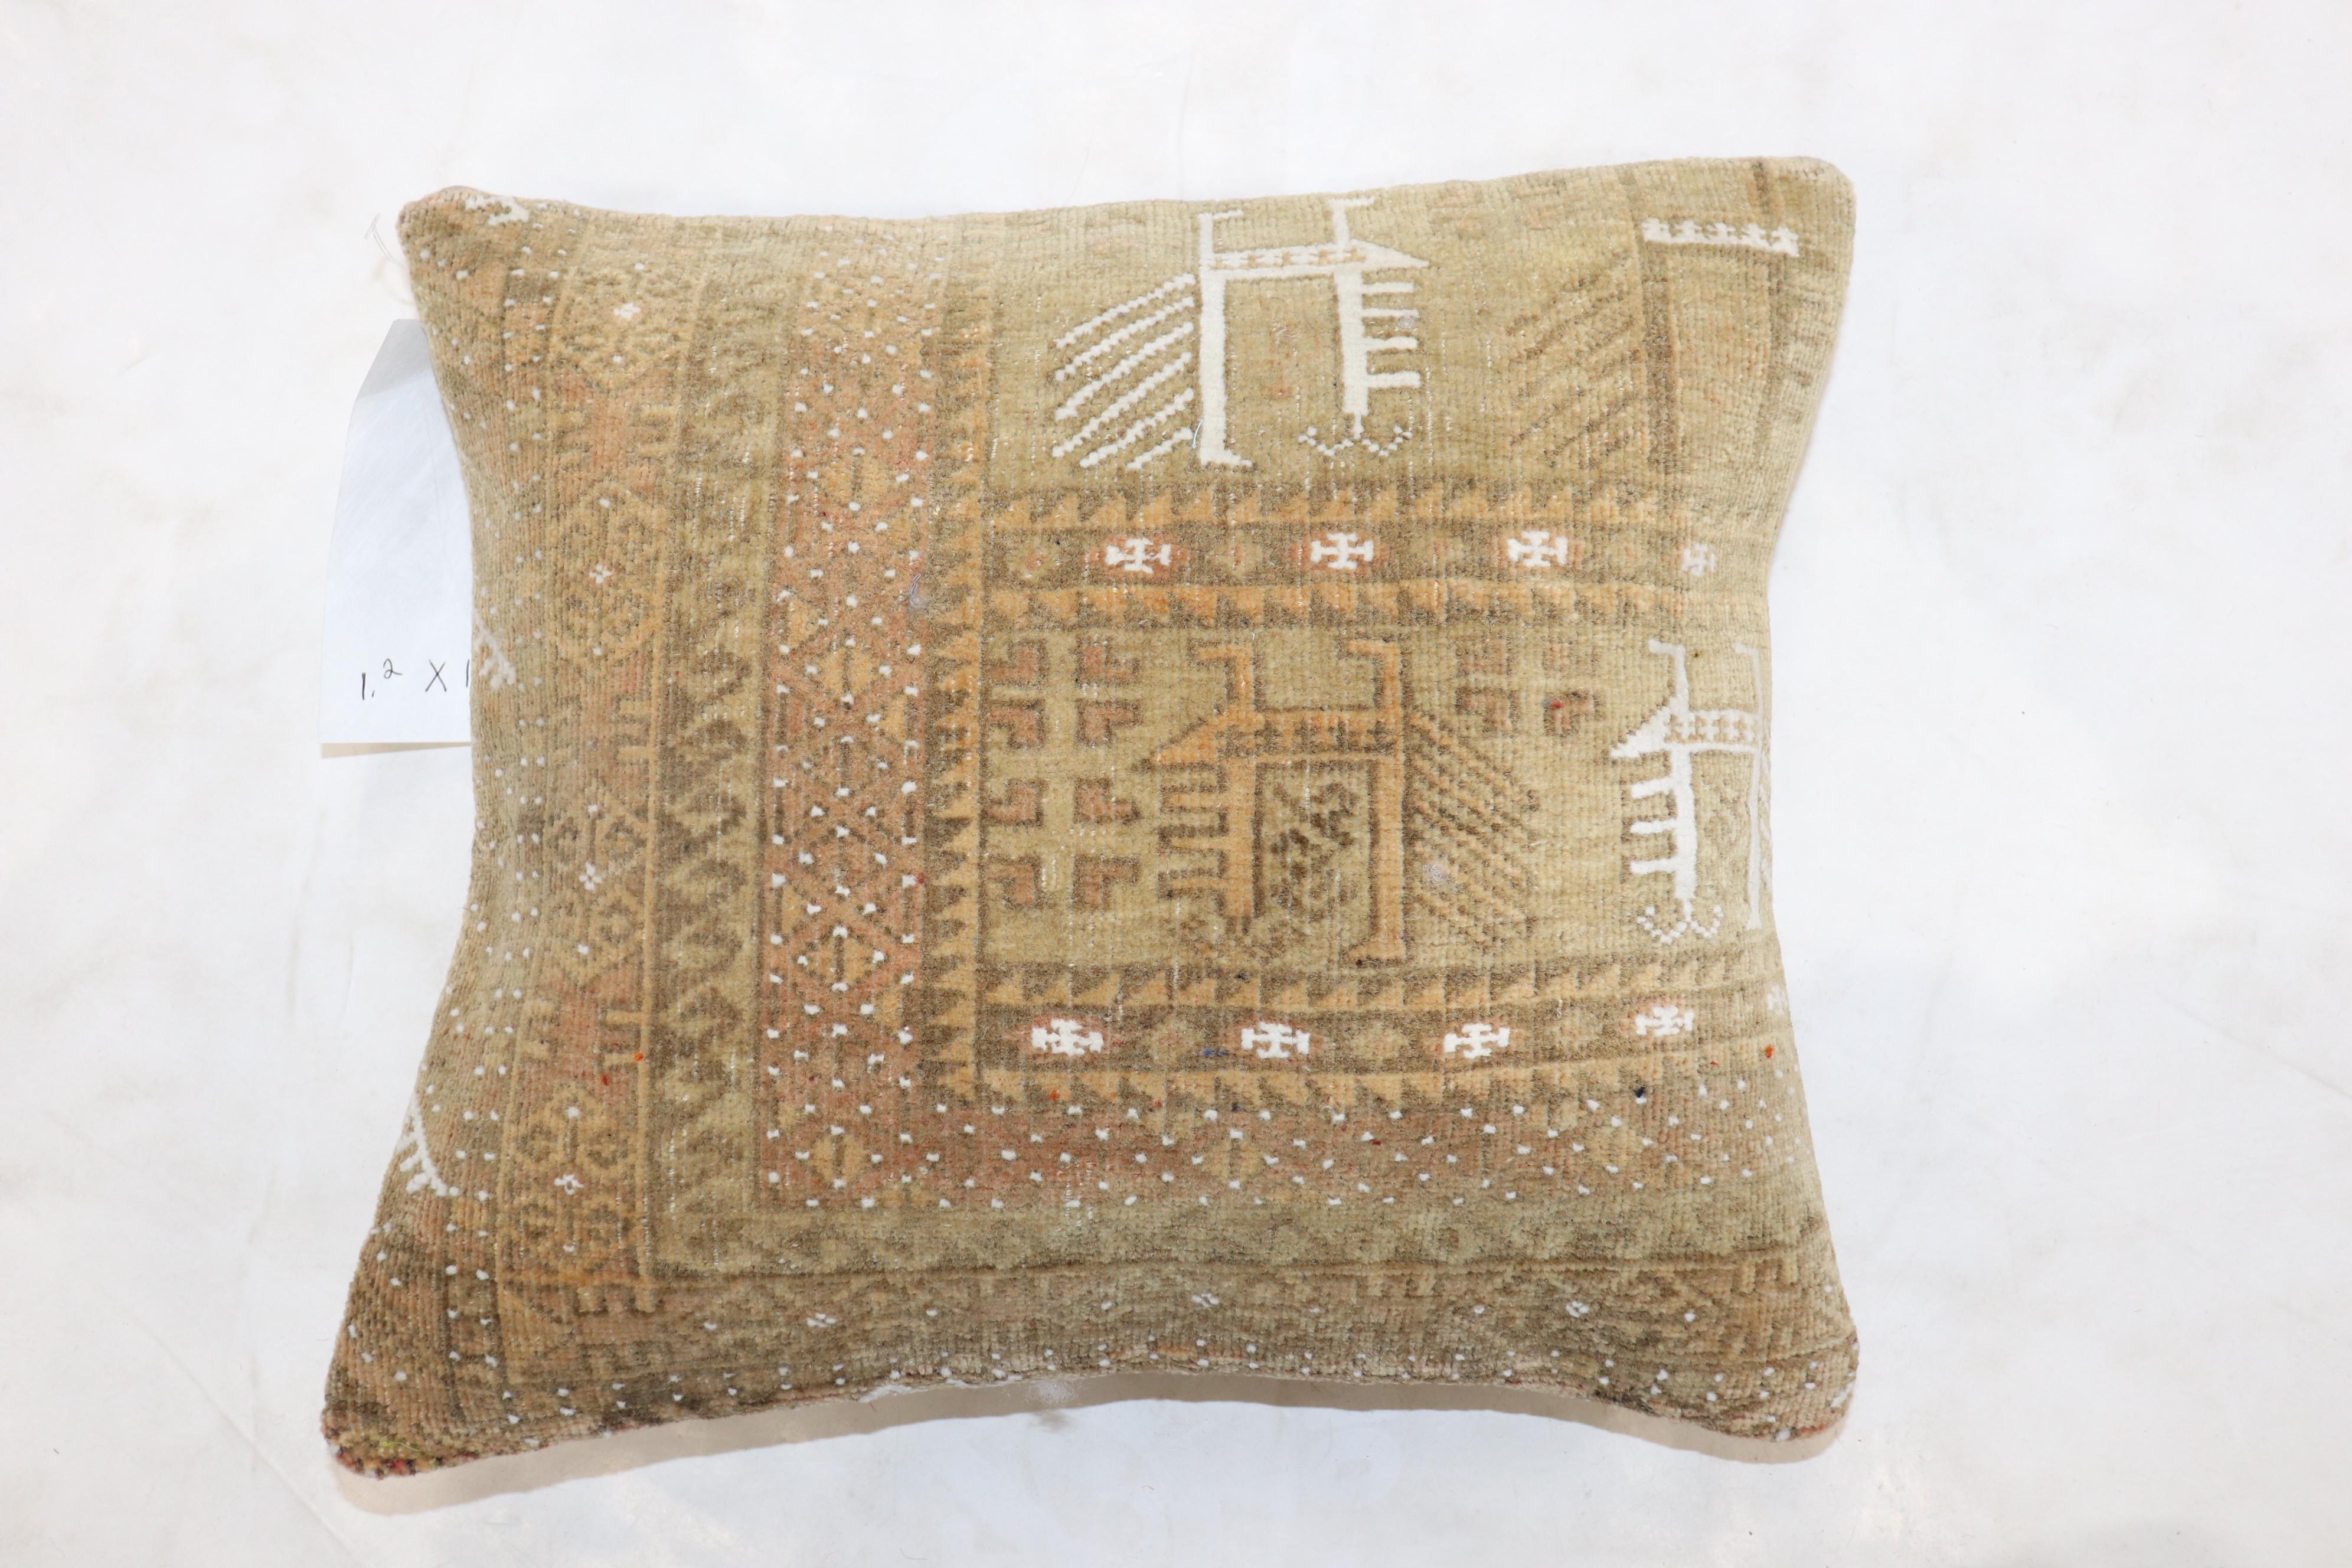 Pillow made from a mid 20th-century neutral color Afghan Rig

Measures: 14